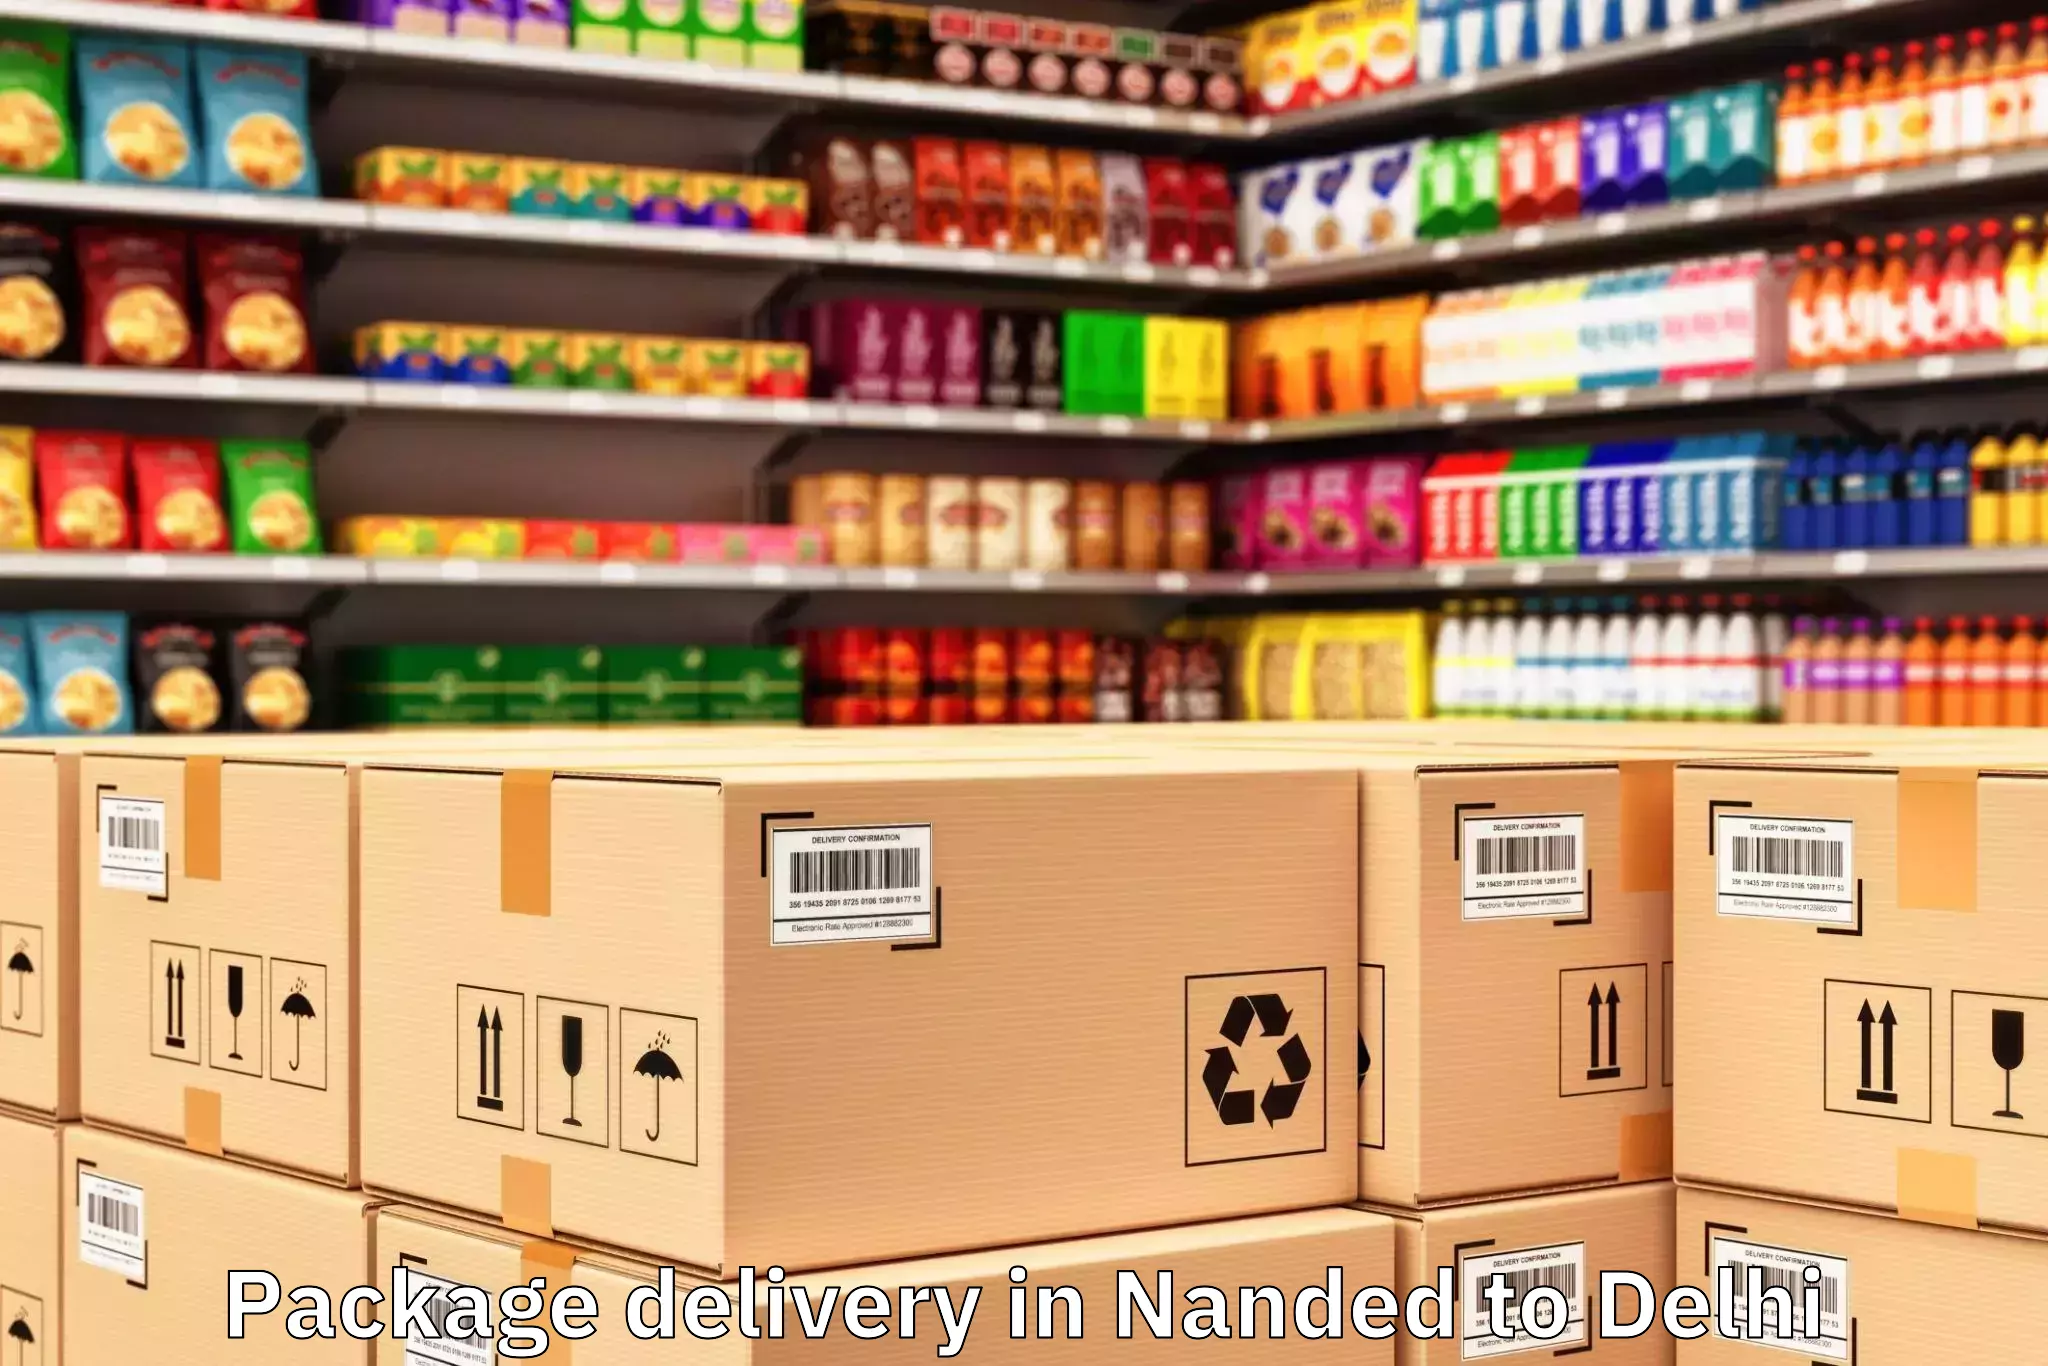 Get Nanded to City Centre Mall Dwarka Package Delivery